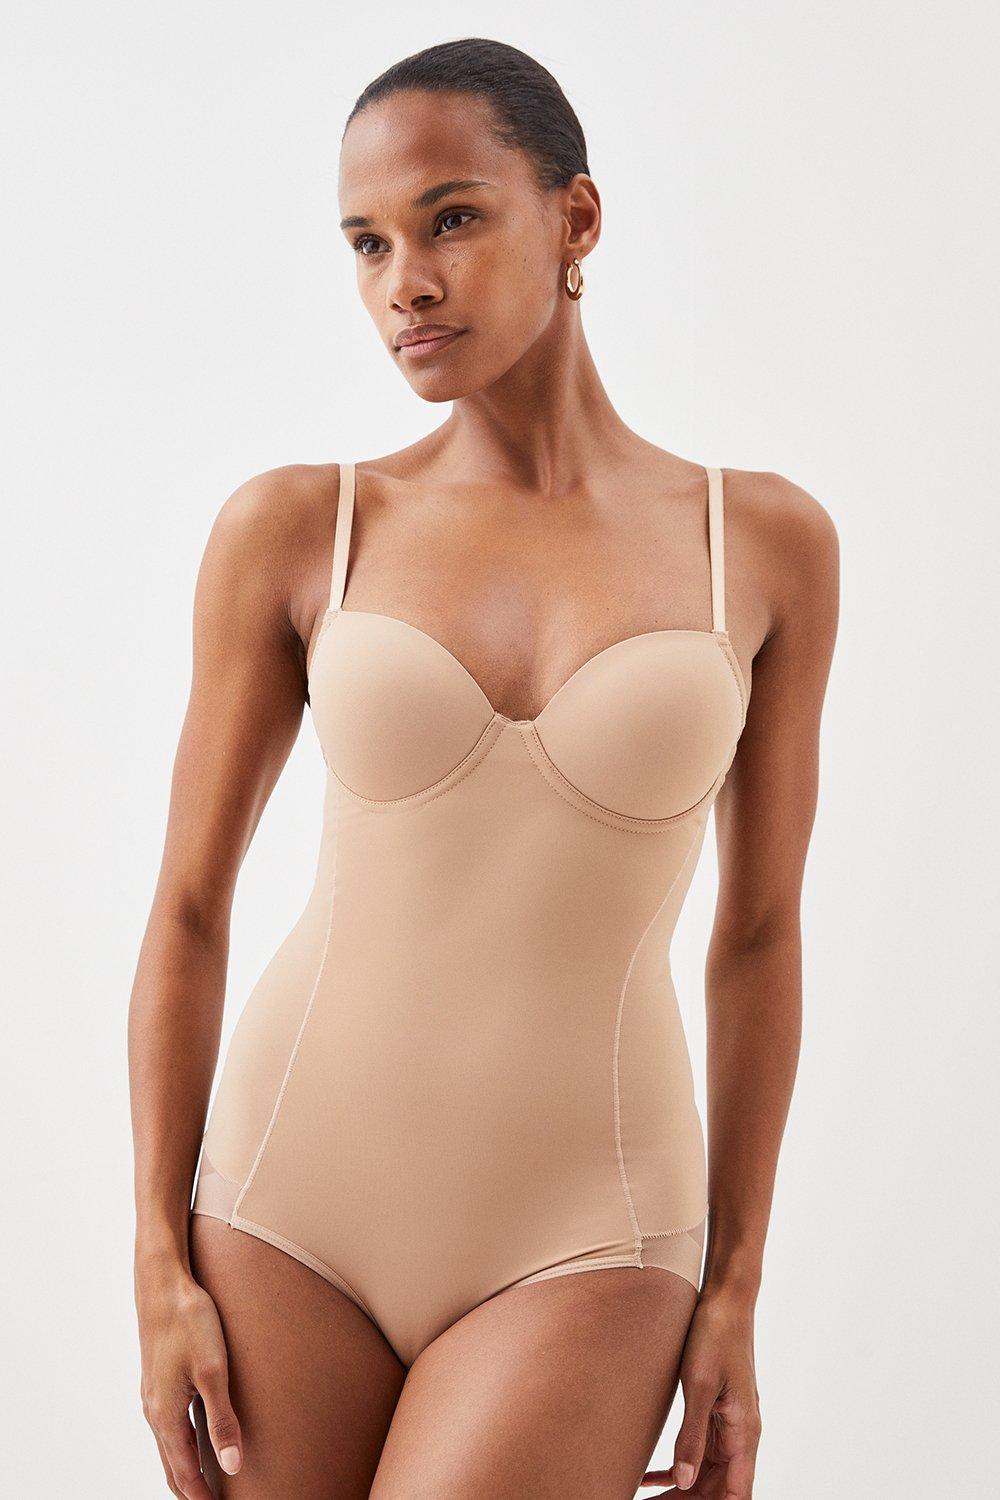 Body Shapers for sale in Las Vegas, Nevada